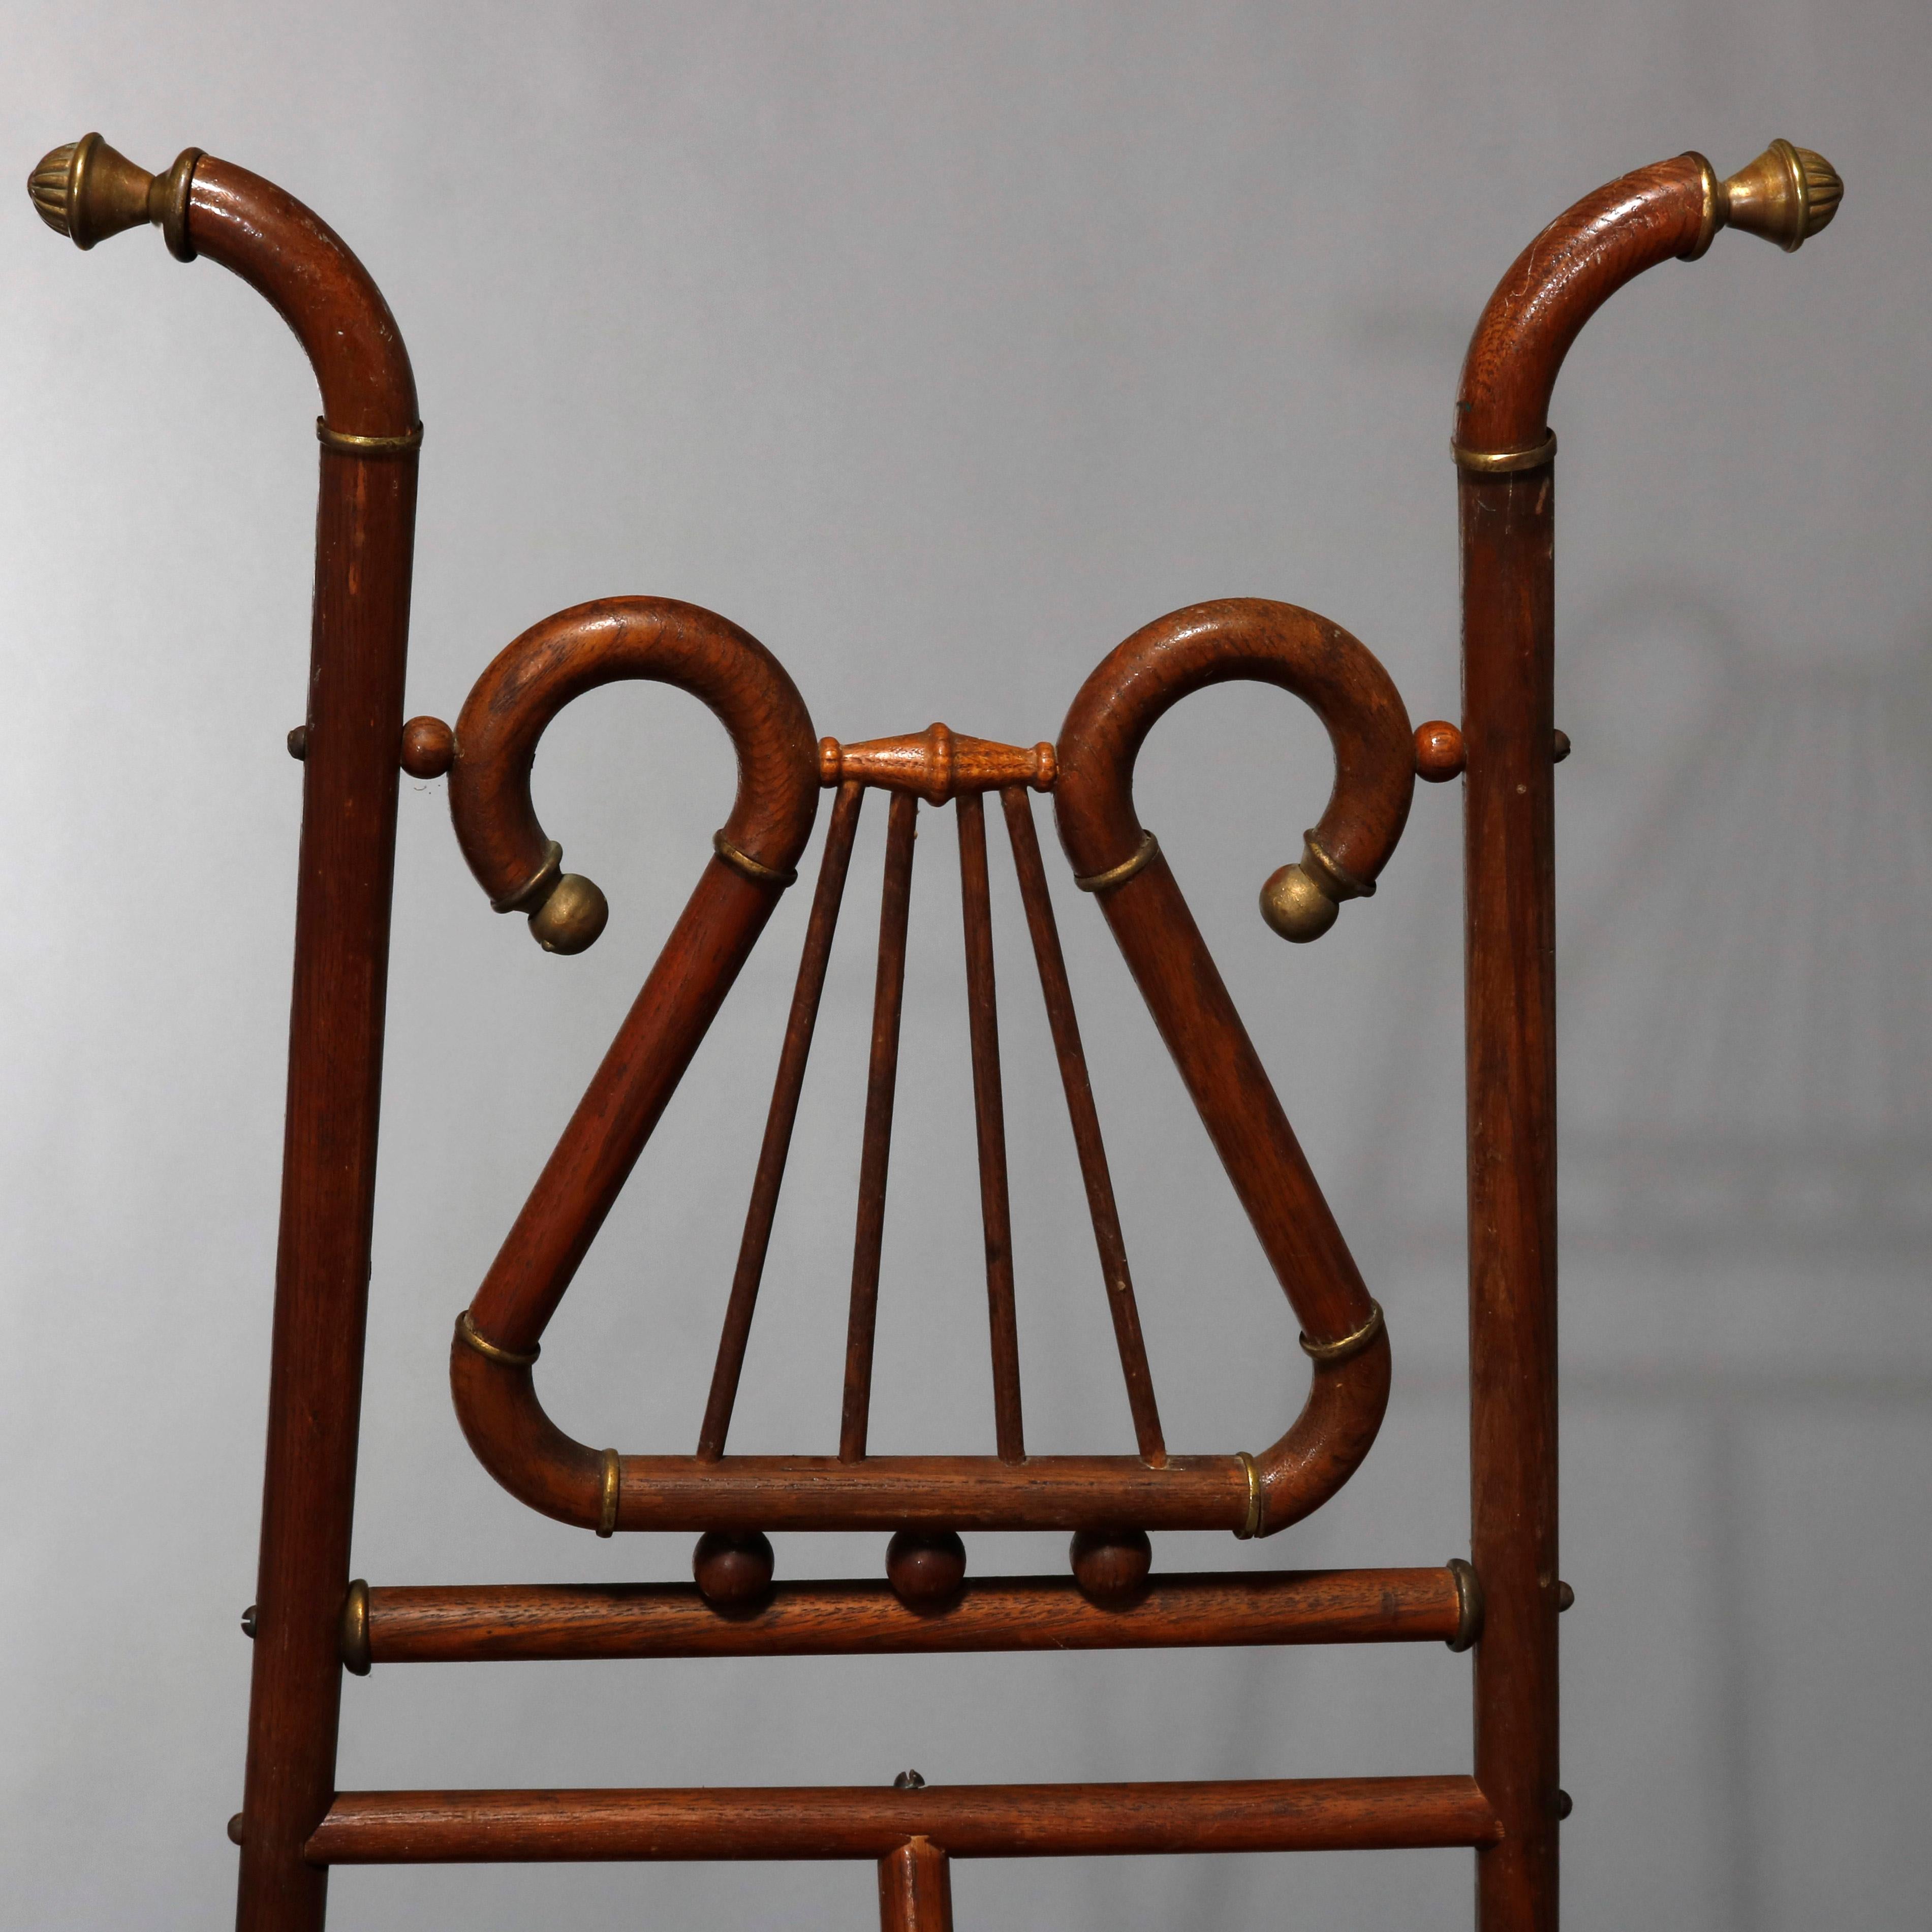 An antique Victorian art display easel offers oak stick and ball construction with lyre form crest, circa 1900.

Measures: 67.5